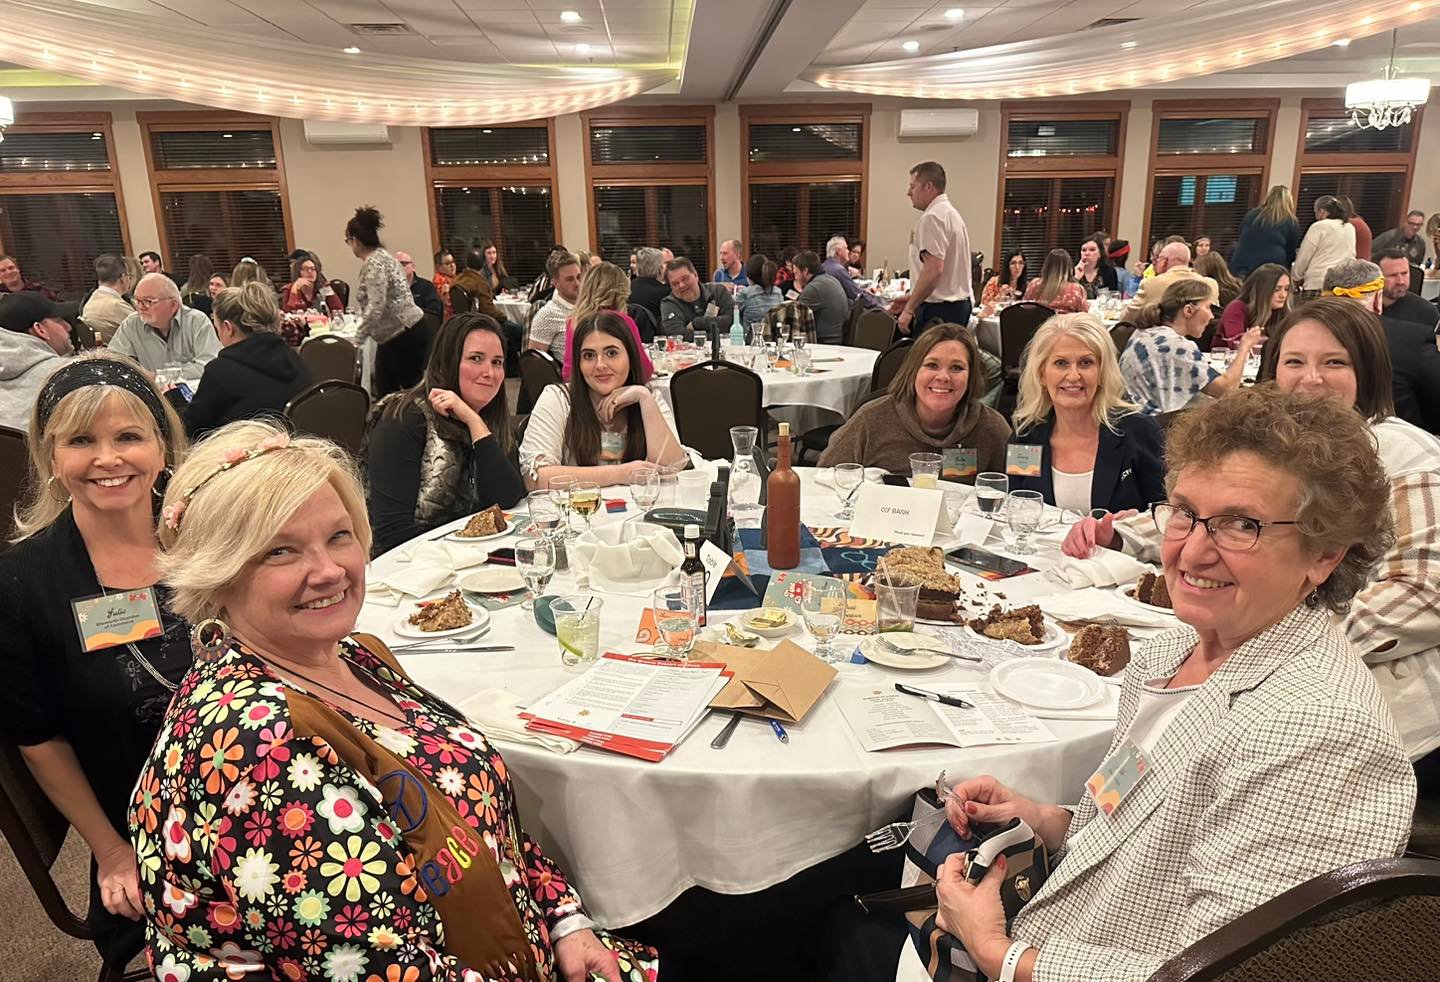 Kilkarney Hills Golf Club in River Falls was packed with Ellsworth Area Chamber of Commerce members Feb. 20 for the eighth annual awards banquet.